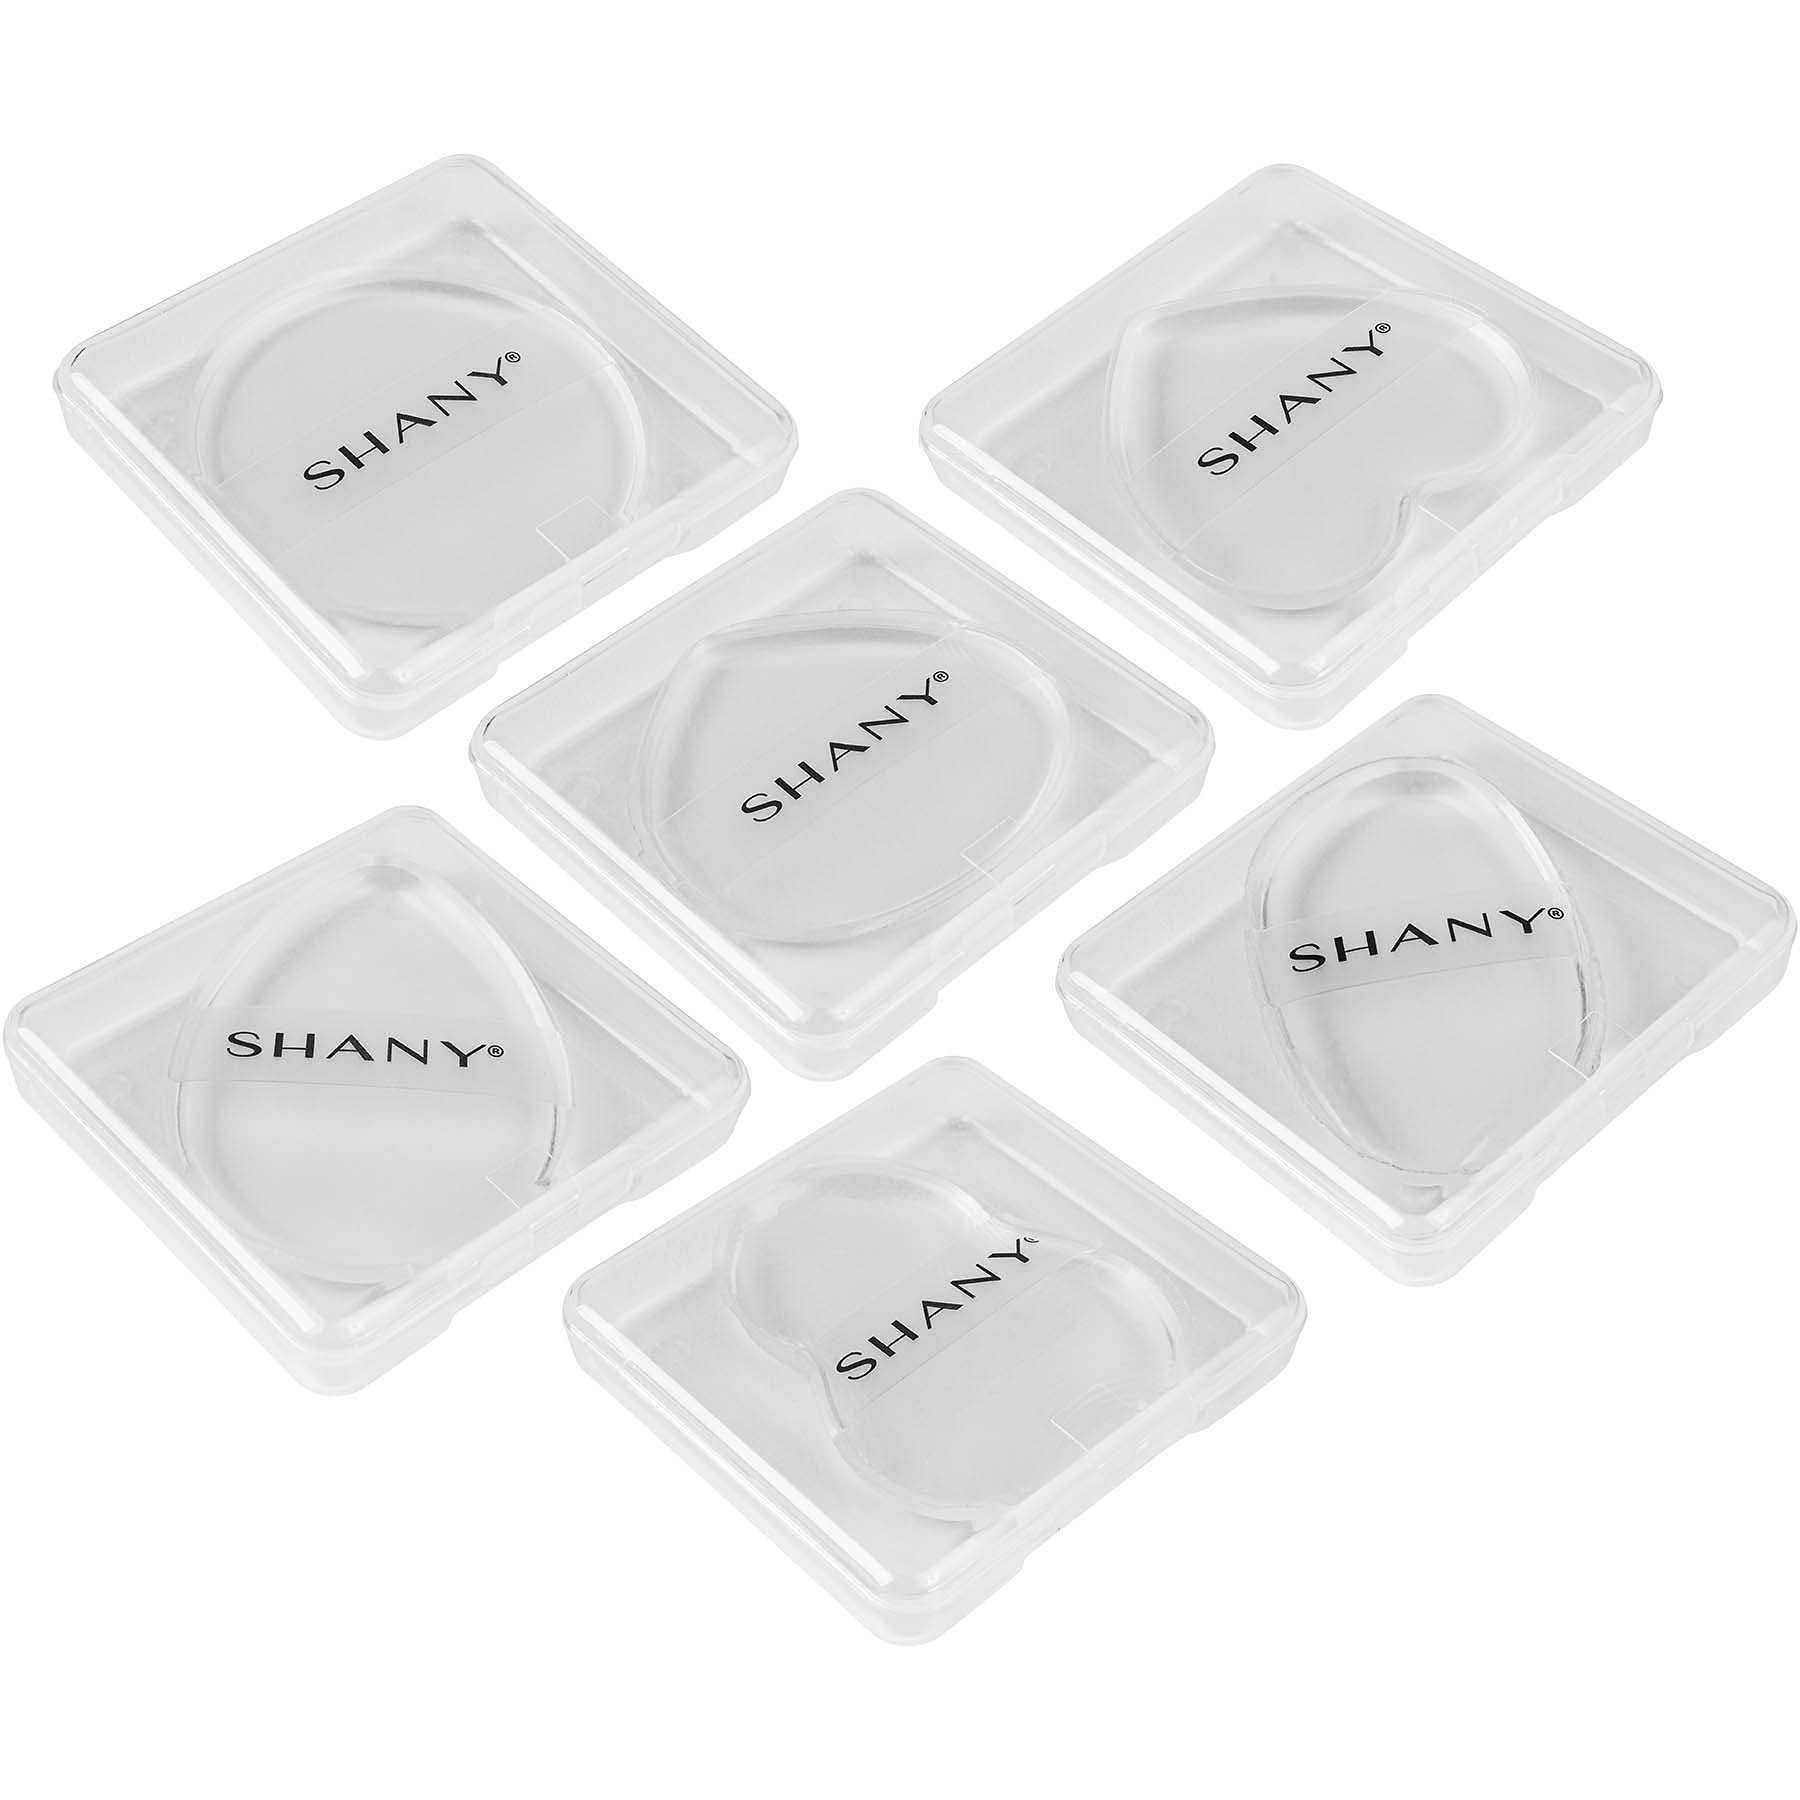 SHANY Stay Jelly Silicone Sponge Set - Clear & Non-Absorbent Makeup Blending Sponges for Flawless Application with Foundation - Assorted Sizes and Shapes - Pack of 6